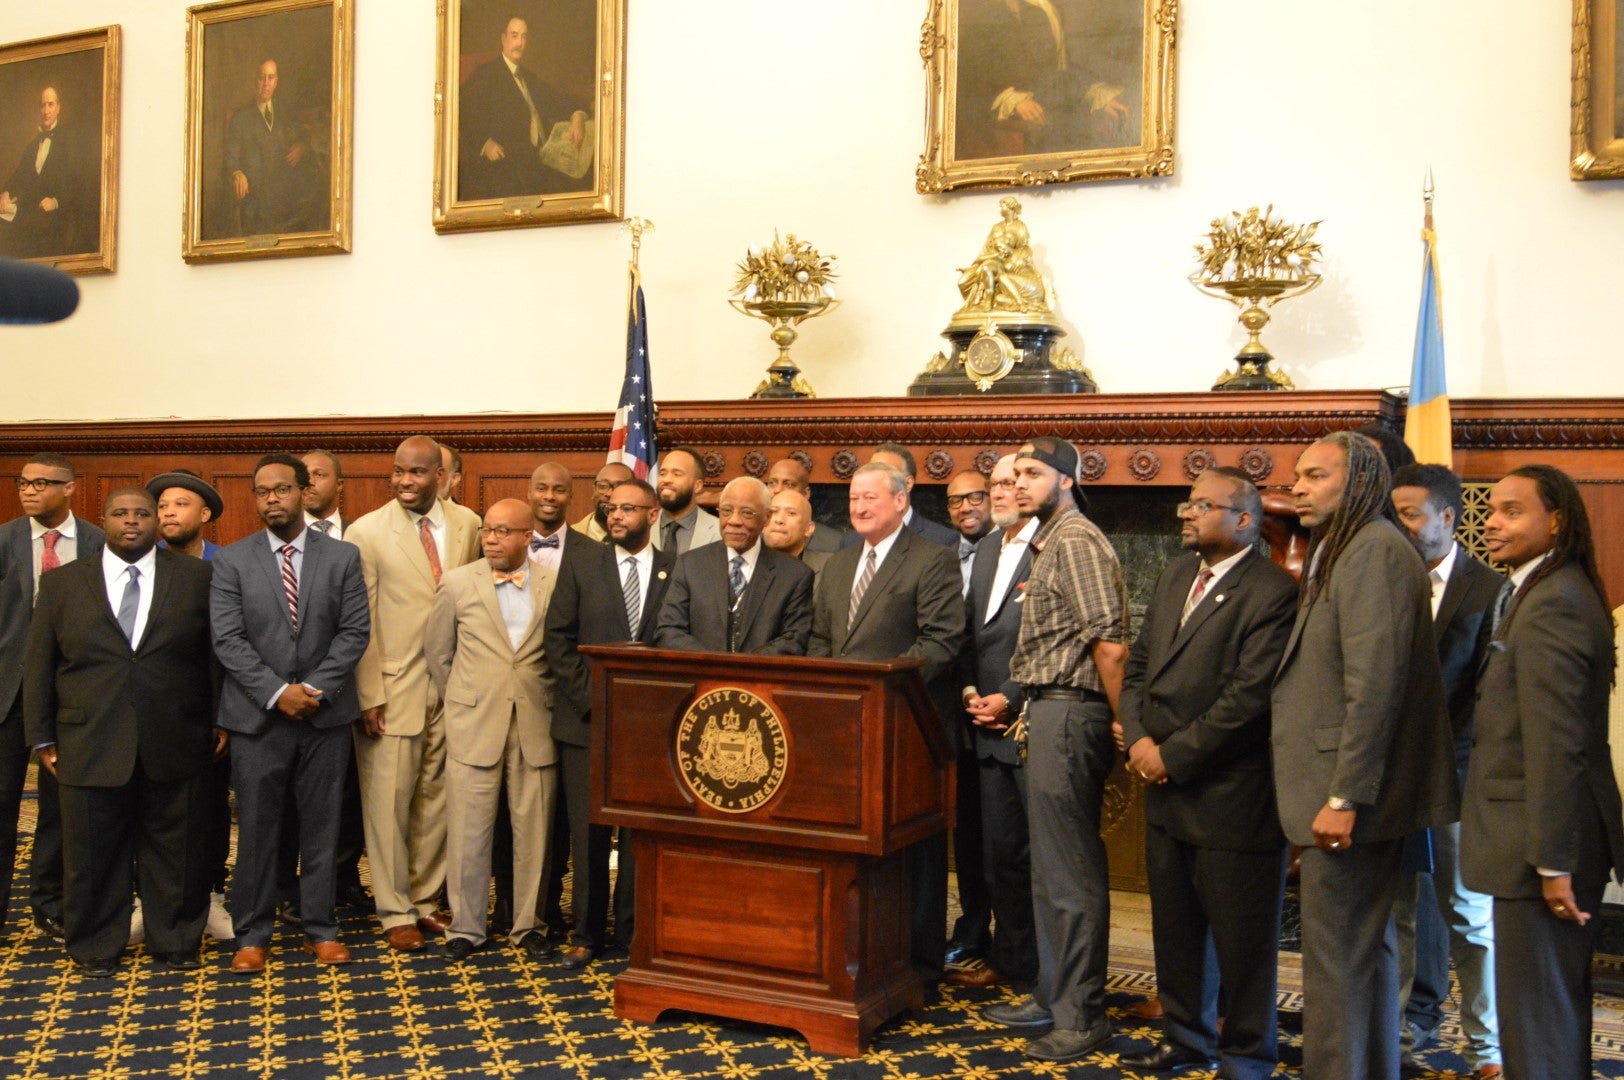 Members of the new Mayor's Commission on African-American Males gather Tuesday at Philadelphia City Hall. (Tom MacDonald/WHYY)